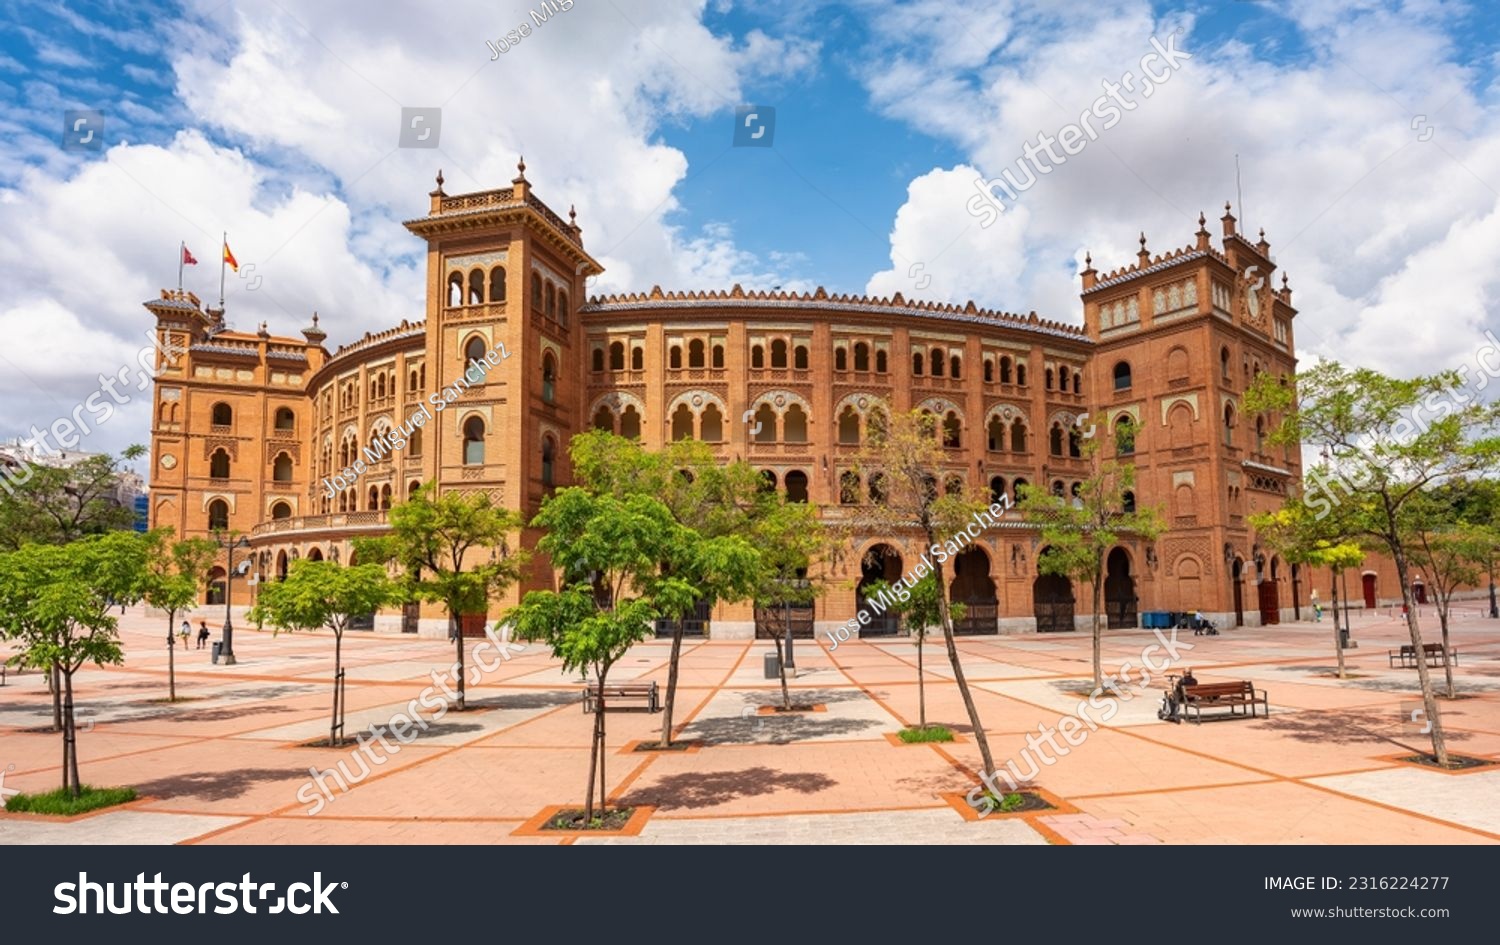 Main facade of the Las Ventas bullring with its old brick architecture, Madrid. #2316224277